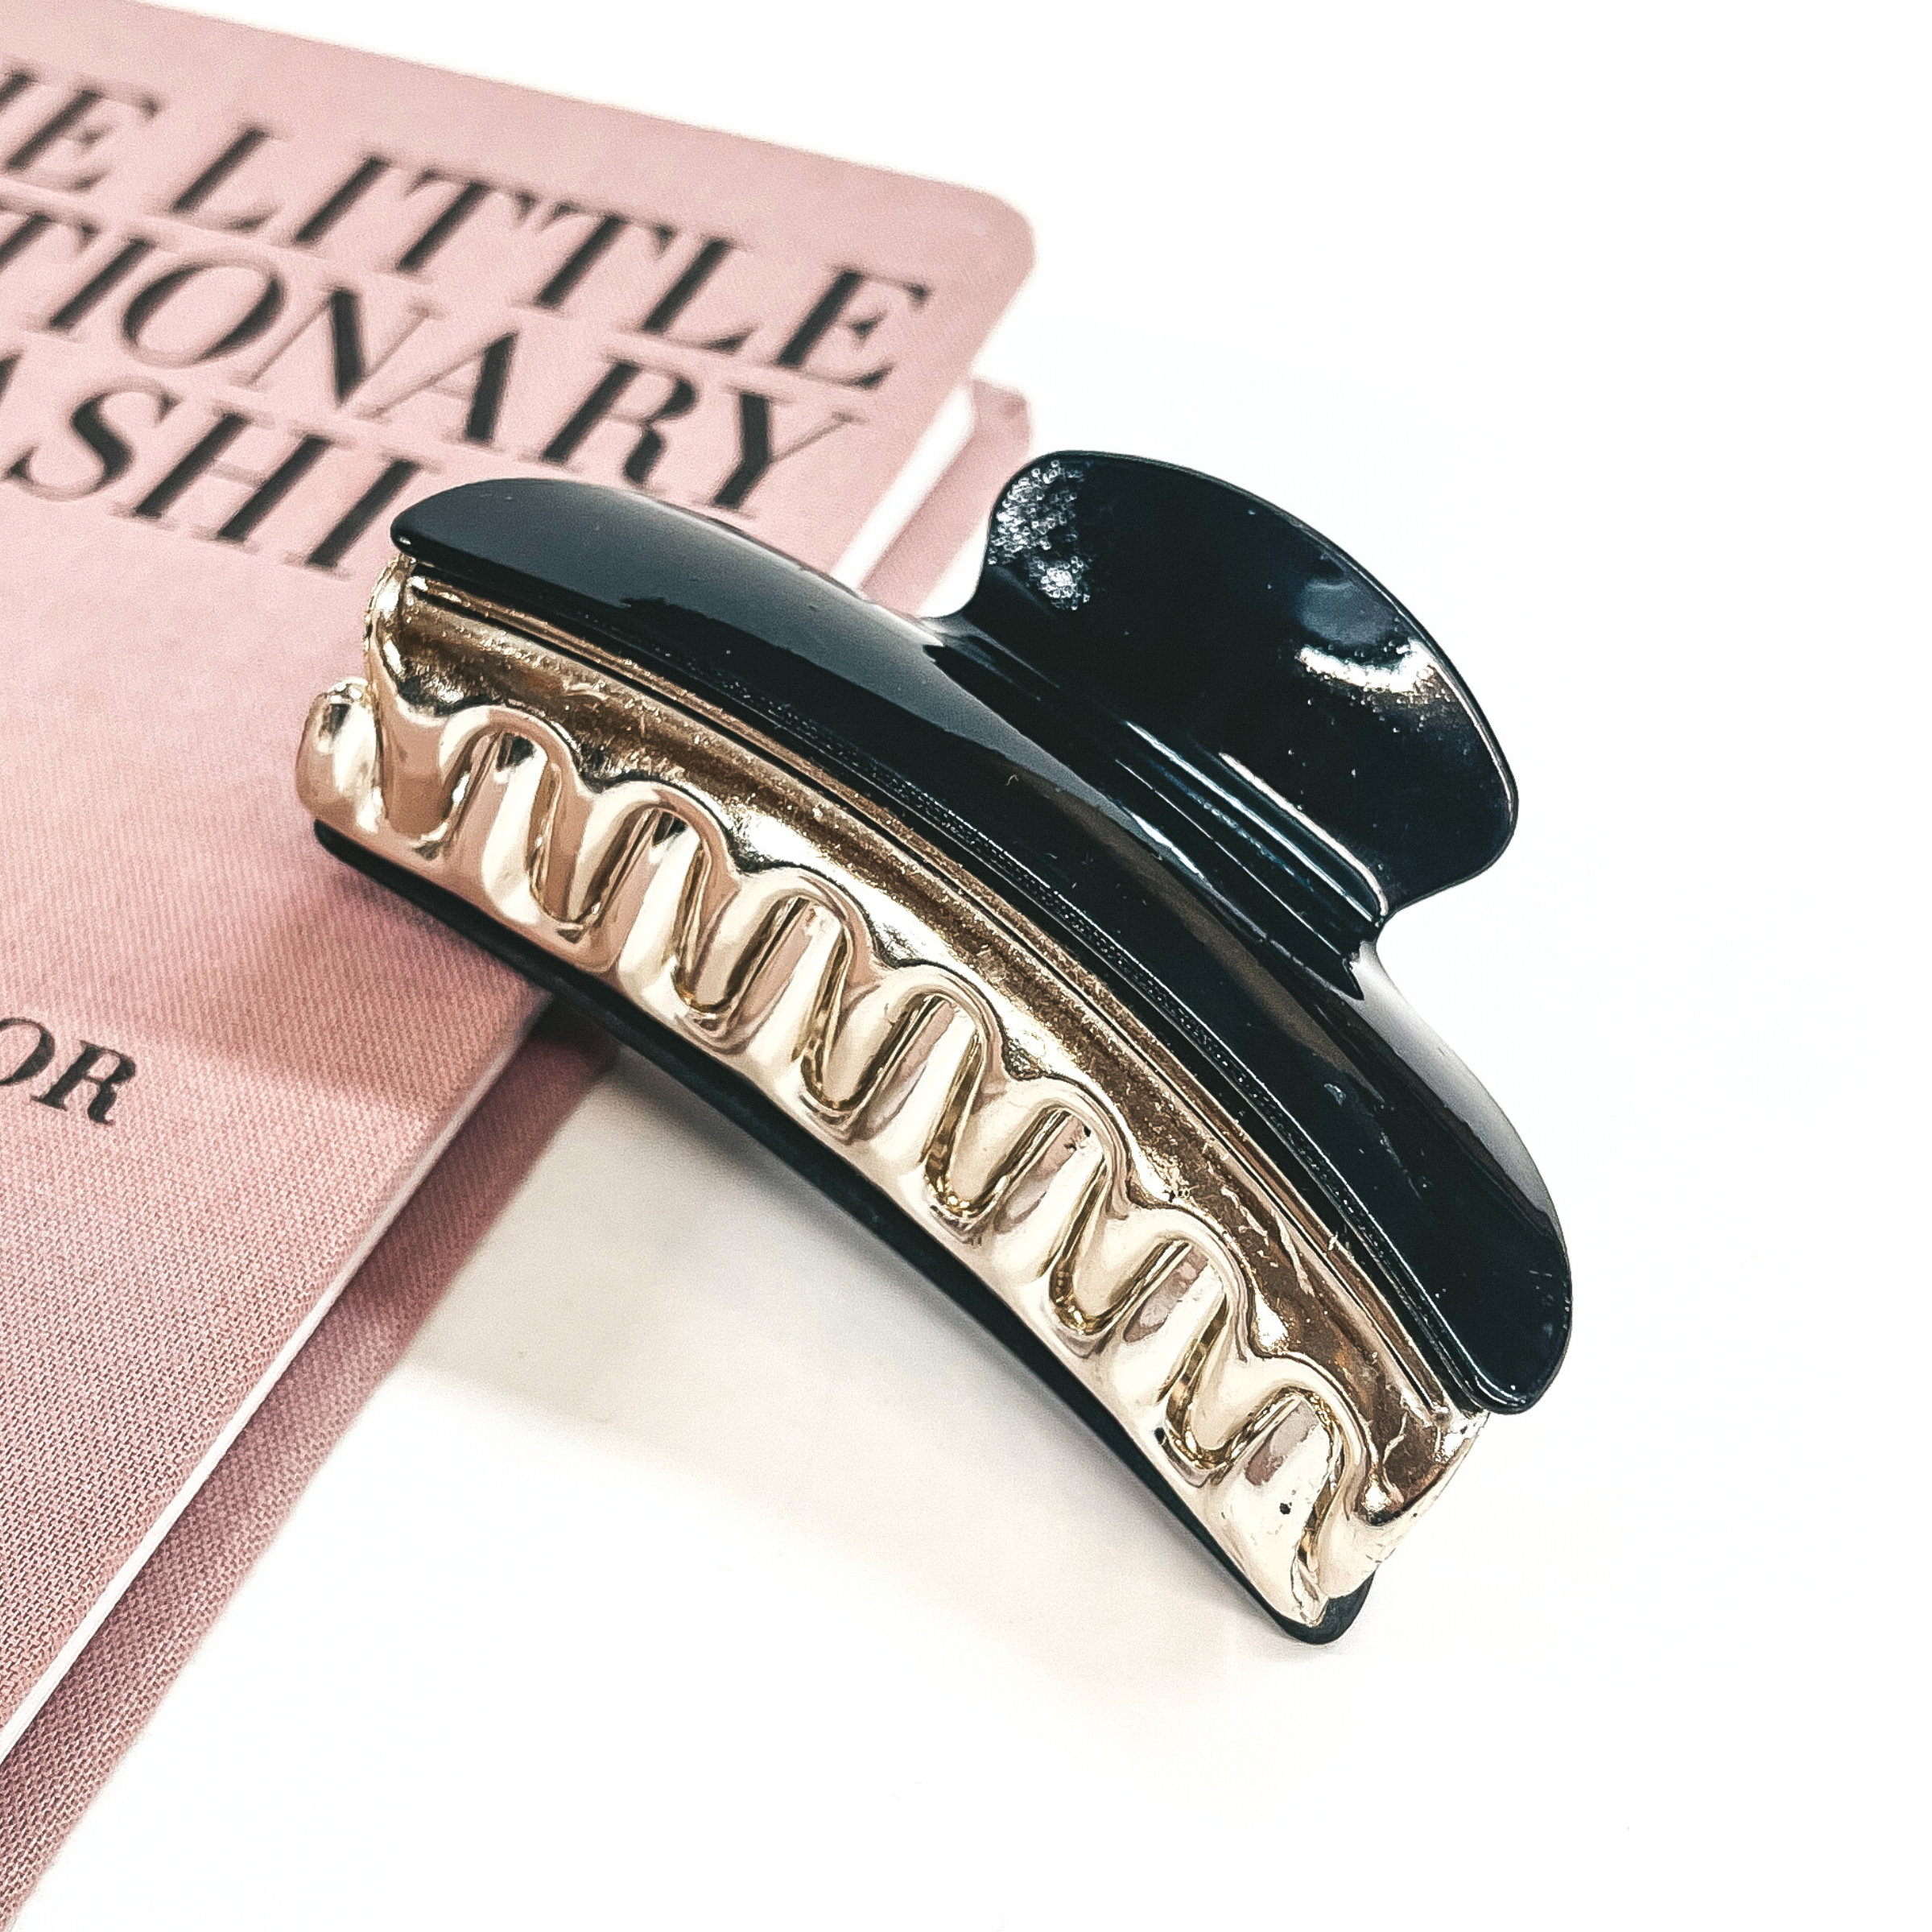 This is a black and gold tone clip leaning on a pink book and white background.